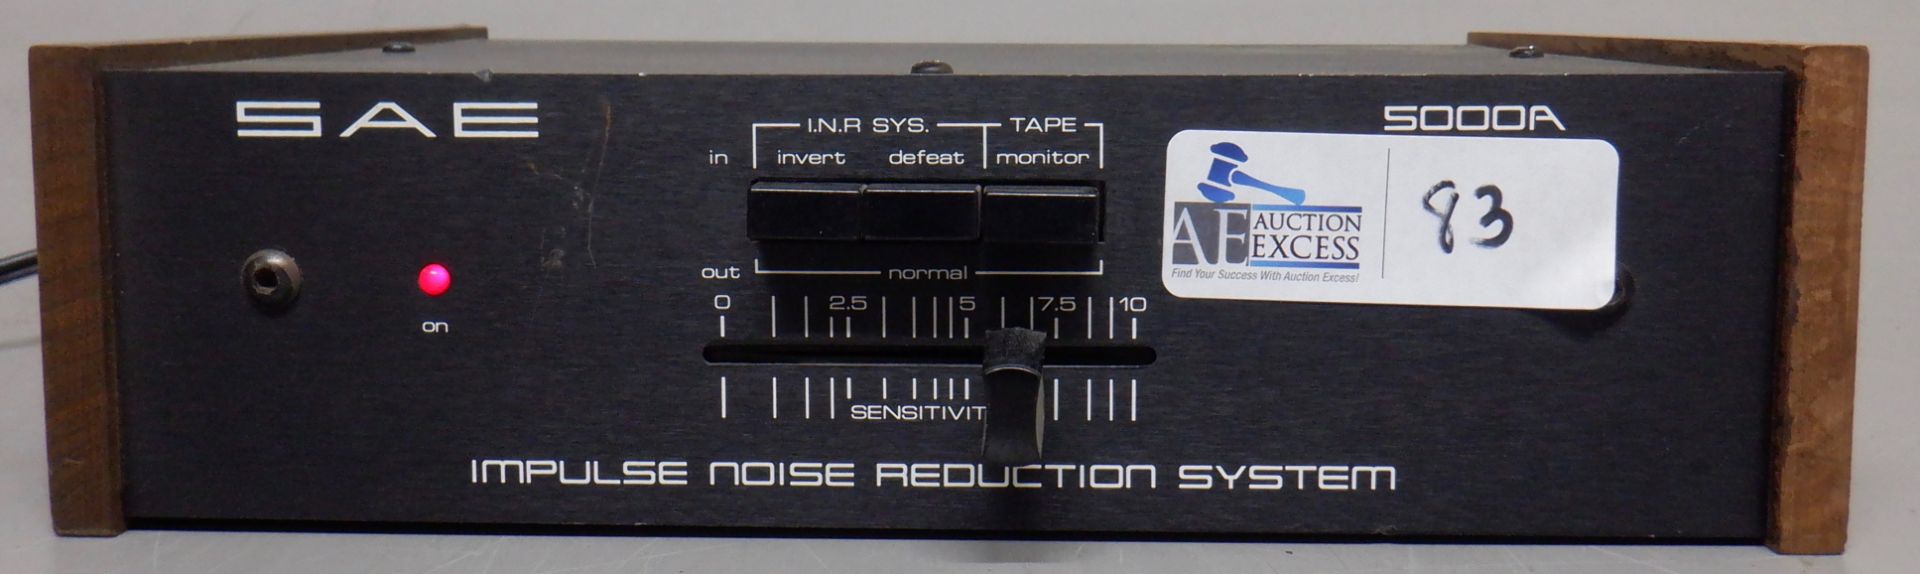 SAE 5000A NOISE REDUCTION